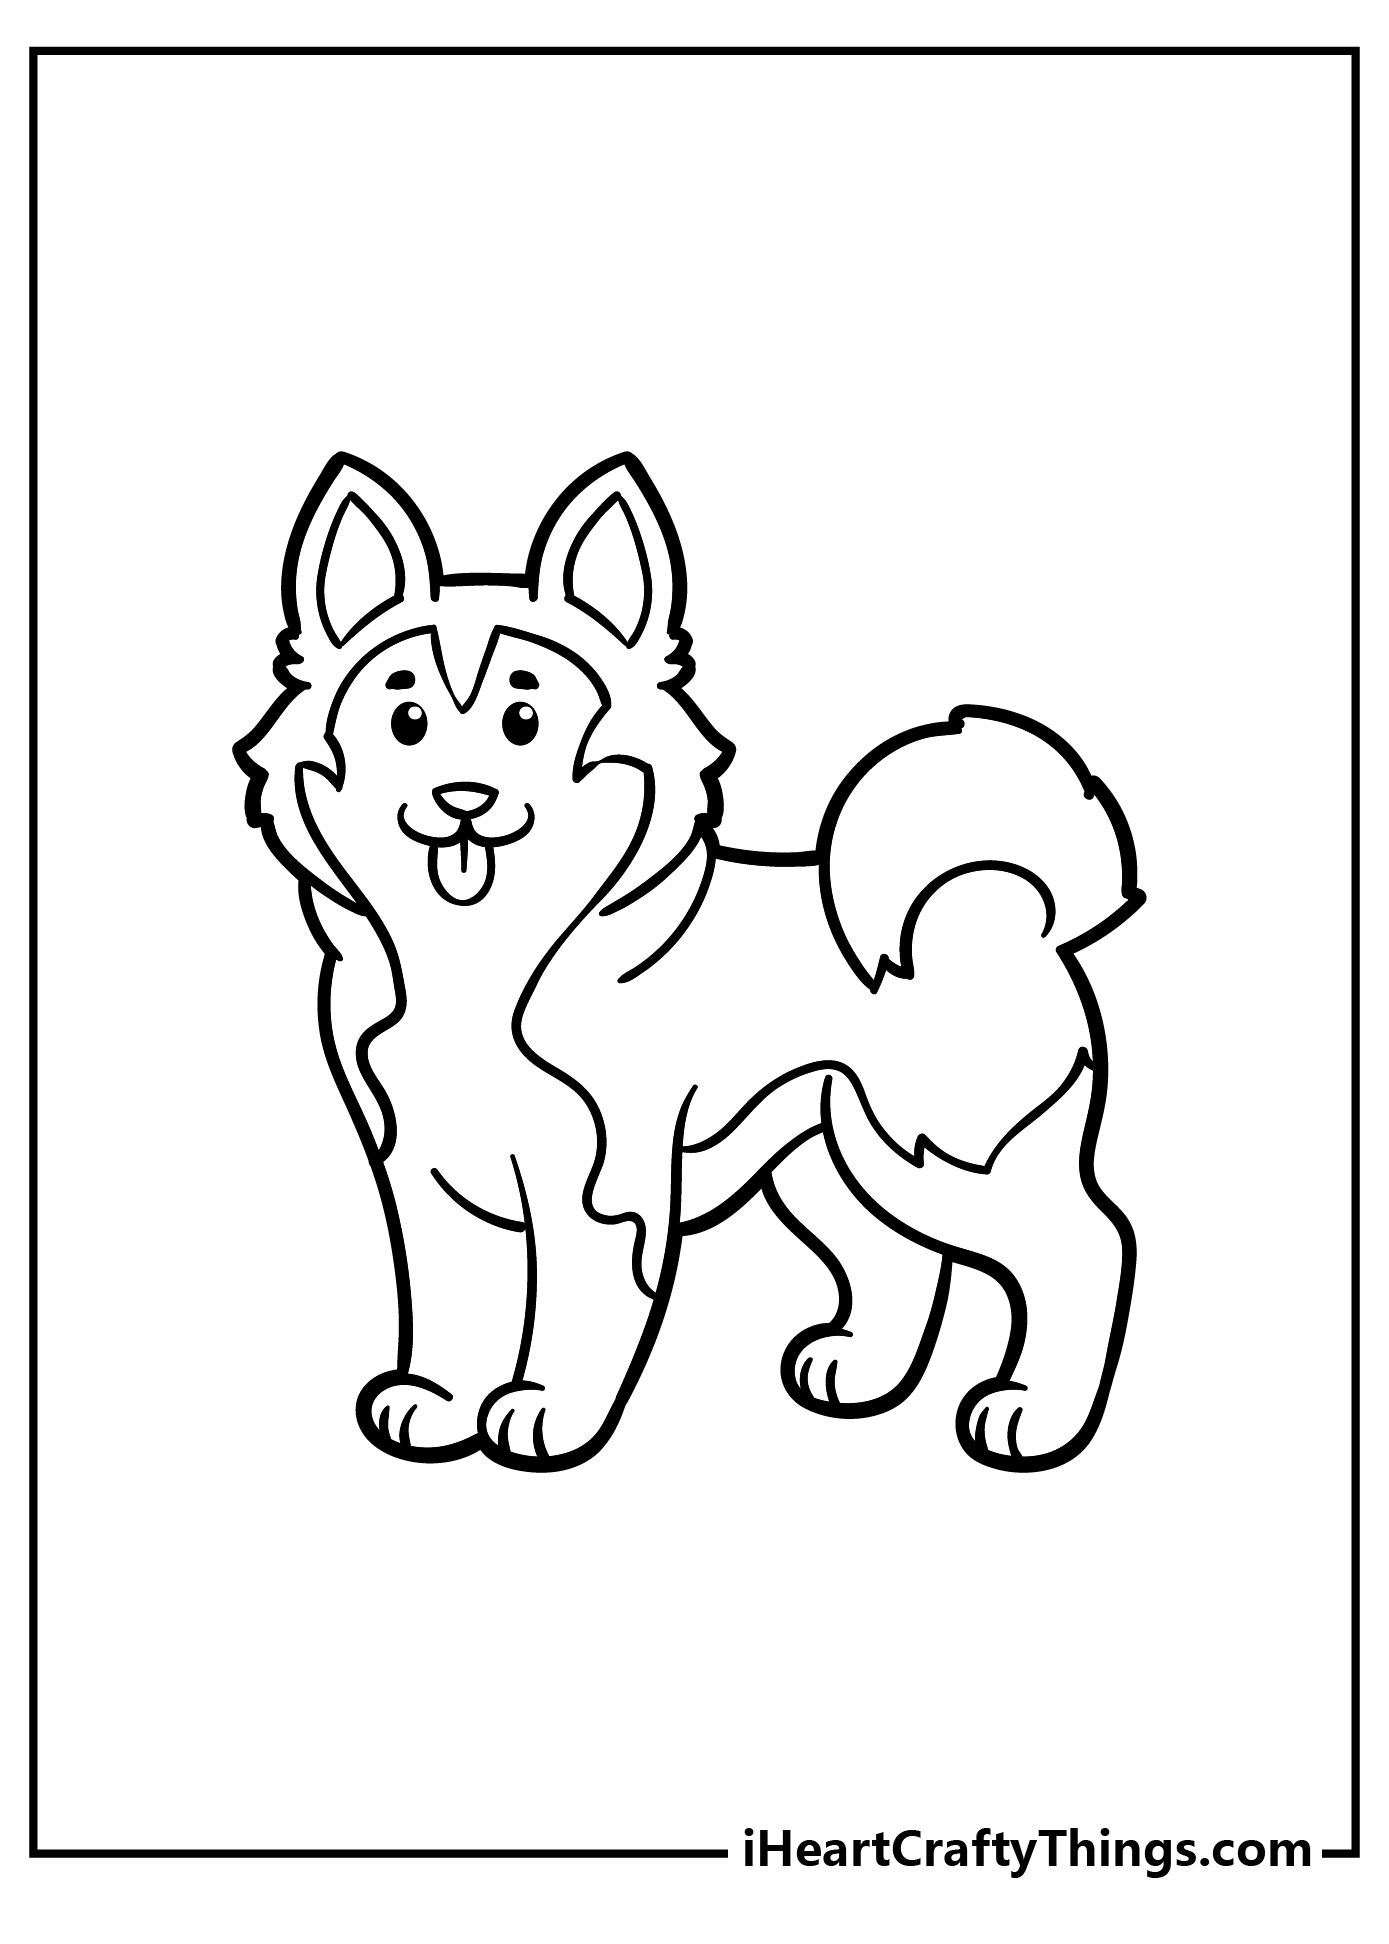 Husky Coloring Pages free pdf download